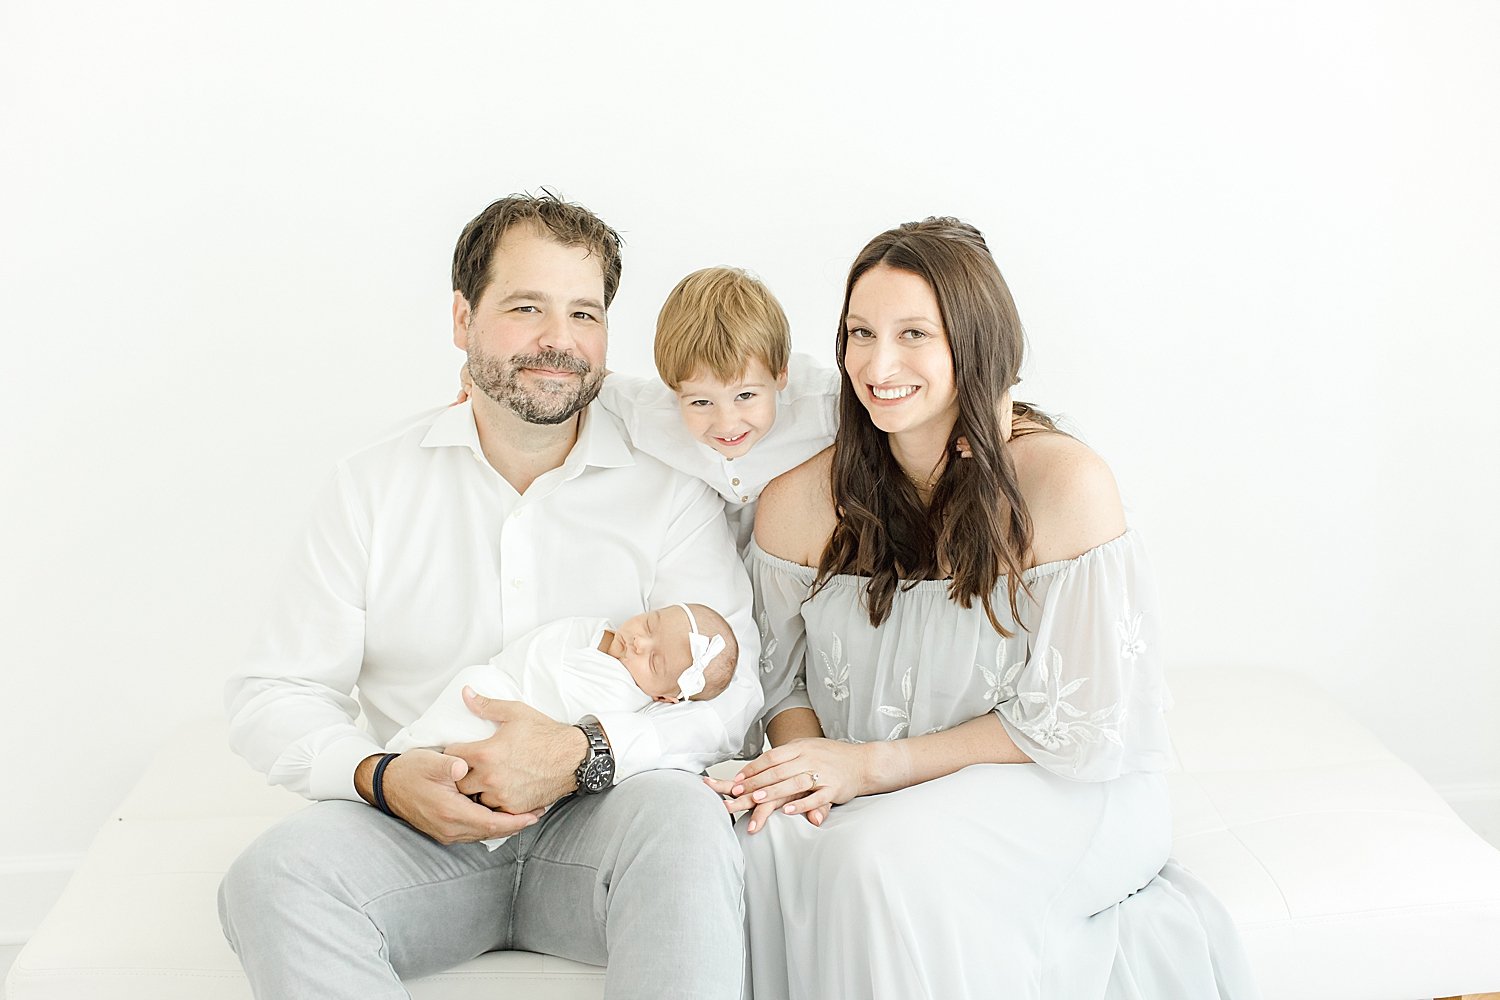 Family portraits with parents, big brother and newborn baby sister | Kristin Wood Photography